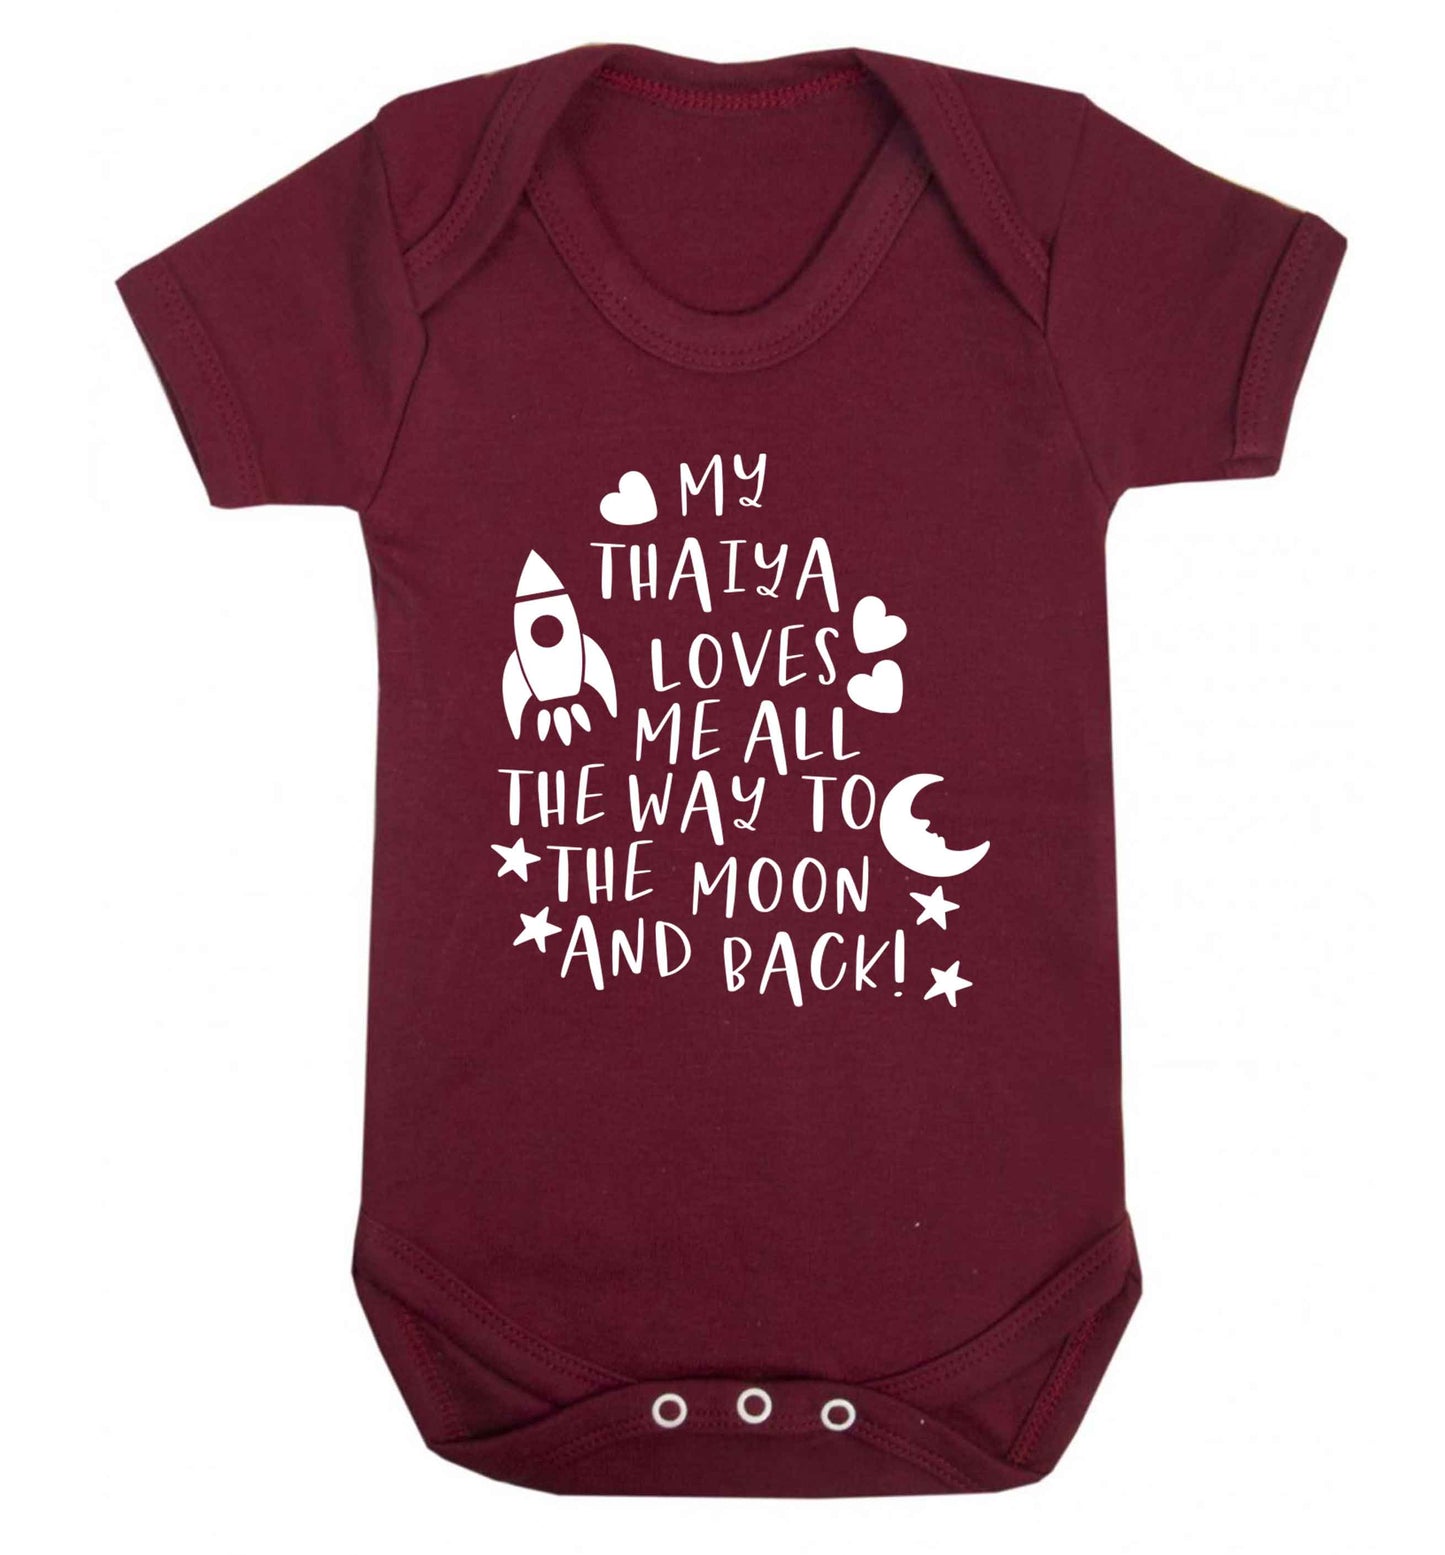 My thaiya loves me all the way to the moon and back Baby Vest maroon 18-24 months